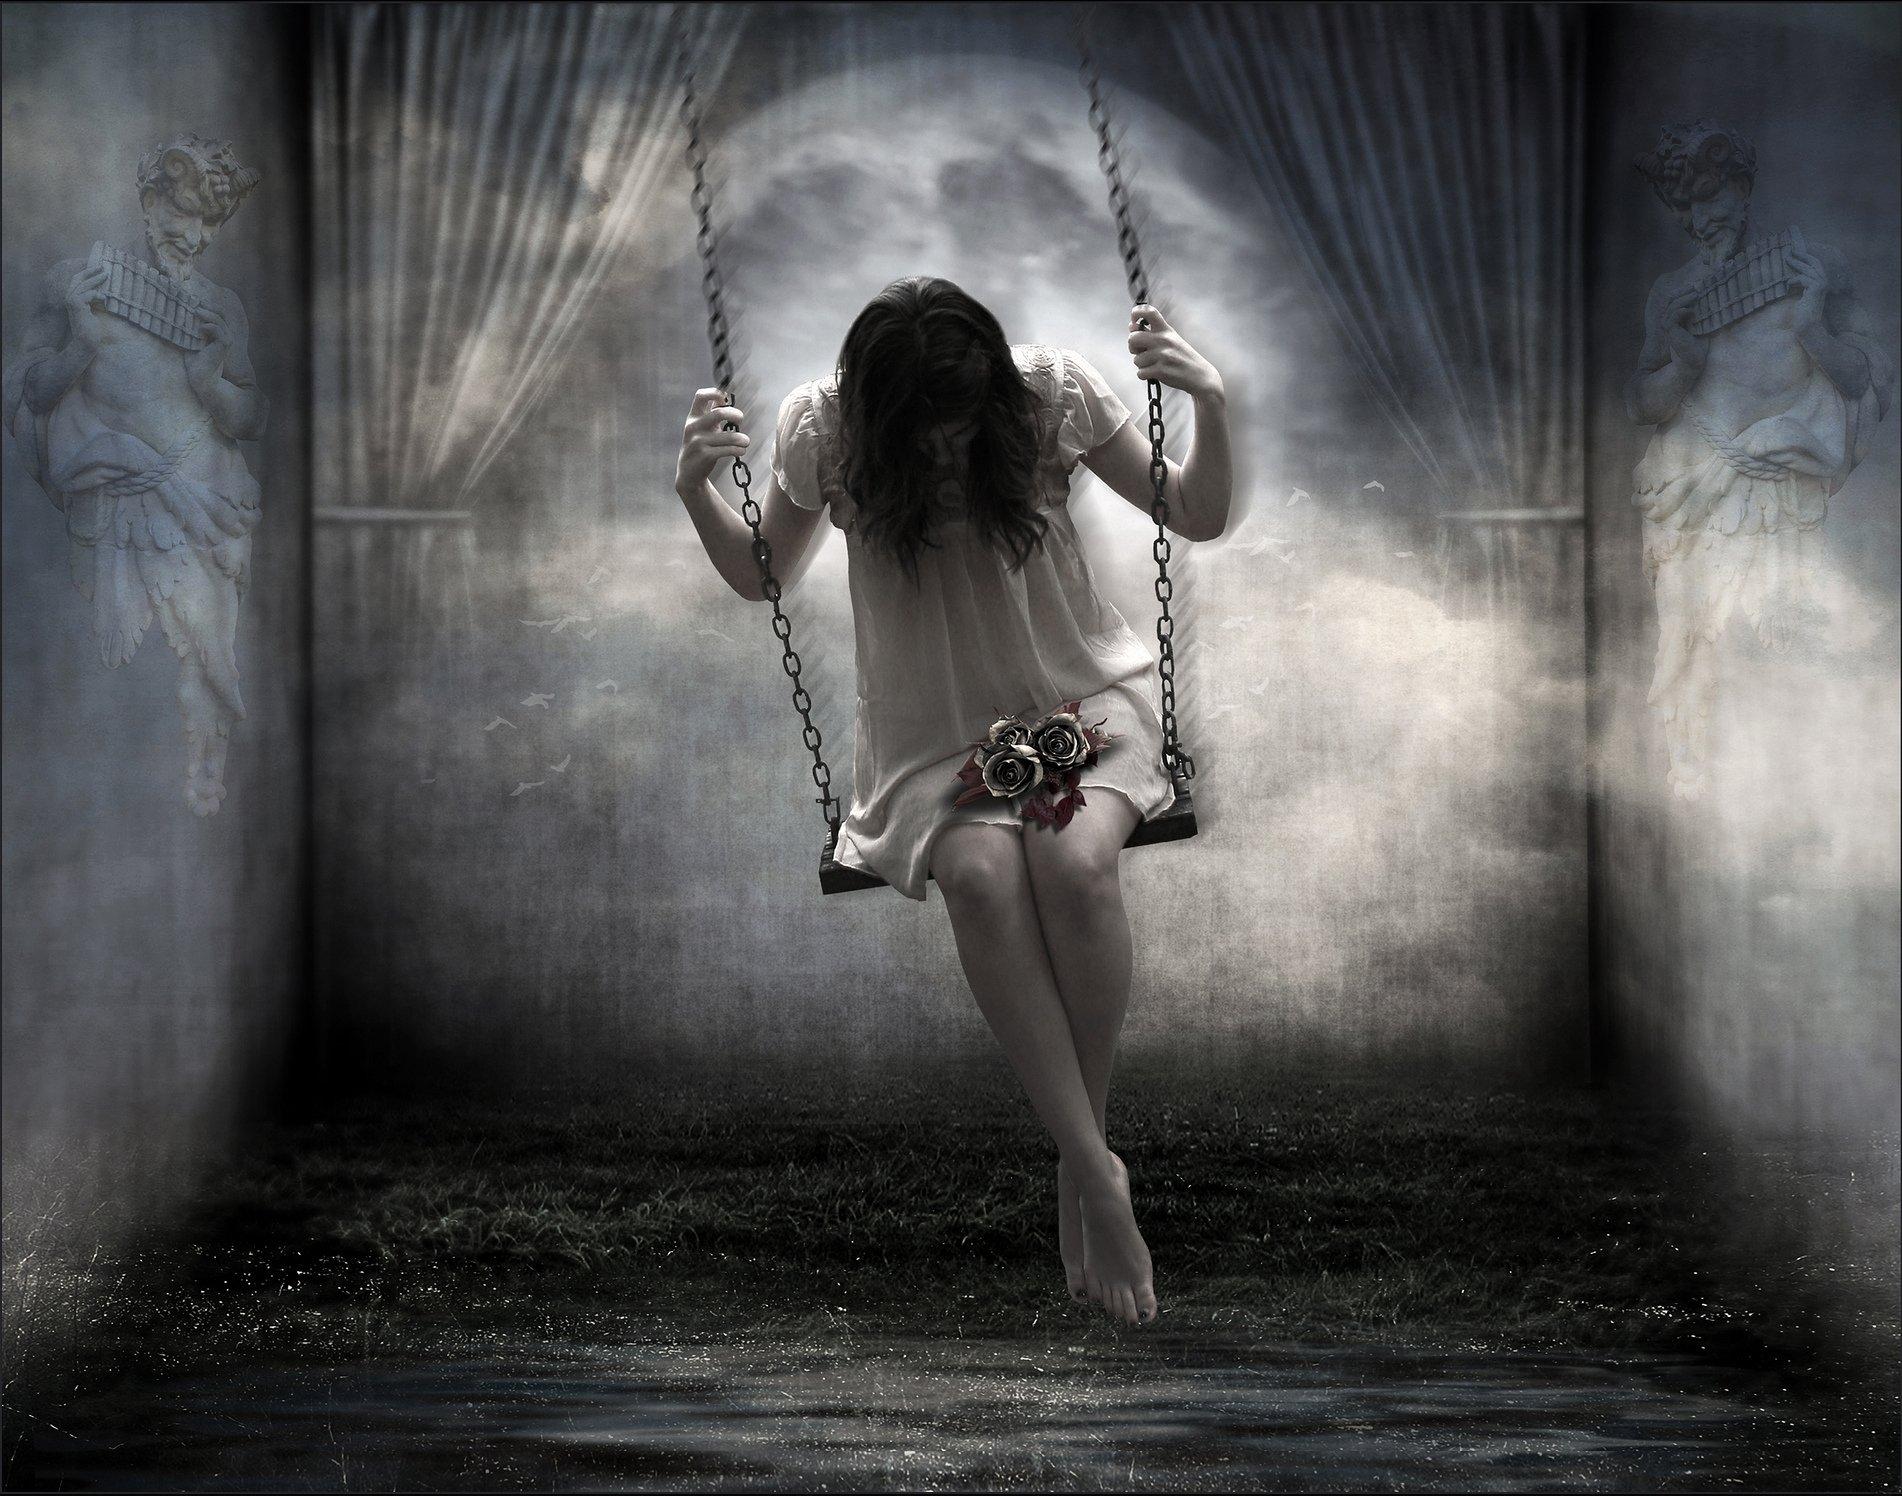 Girl on a Swing in Ghostly Room Wallpaper and Background